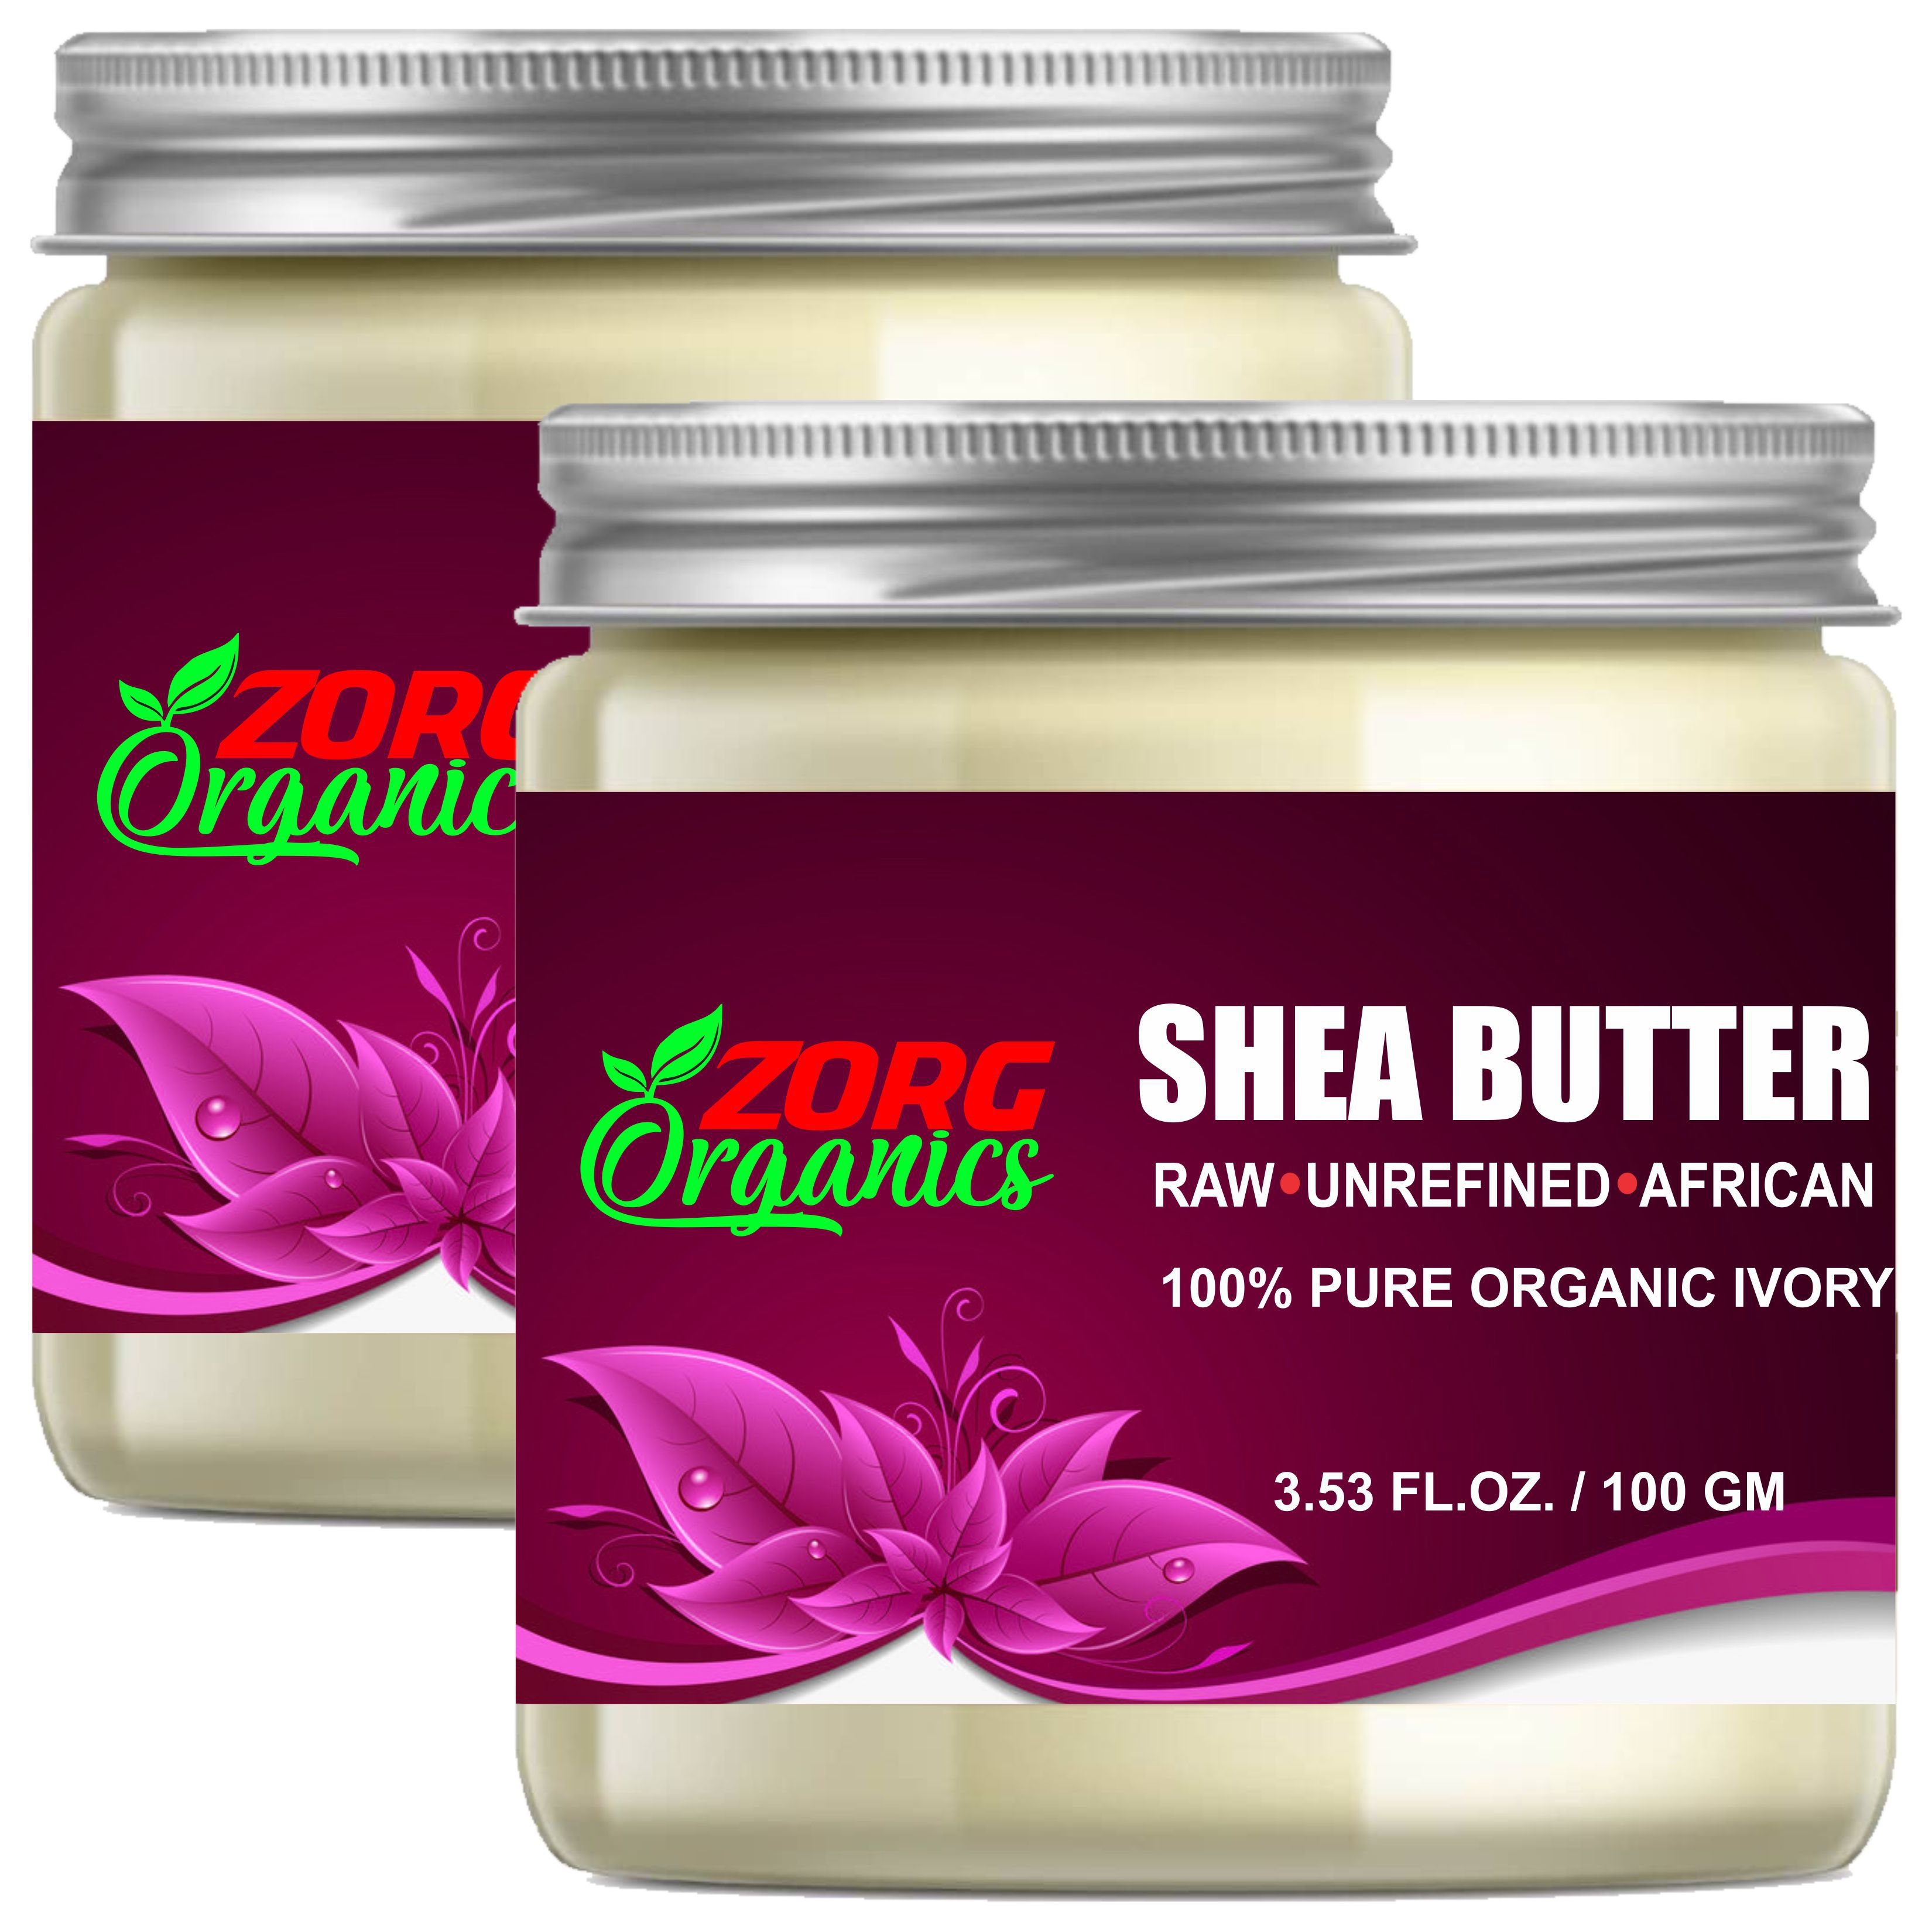     			Zorg Organics 100% Pure Ivory African Shea Butter Raw Great For Face,Skin,Body,Lips Moisturizer 200 ml Pack of 2